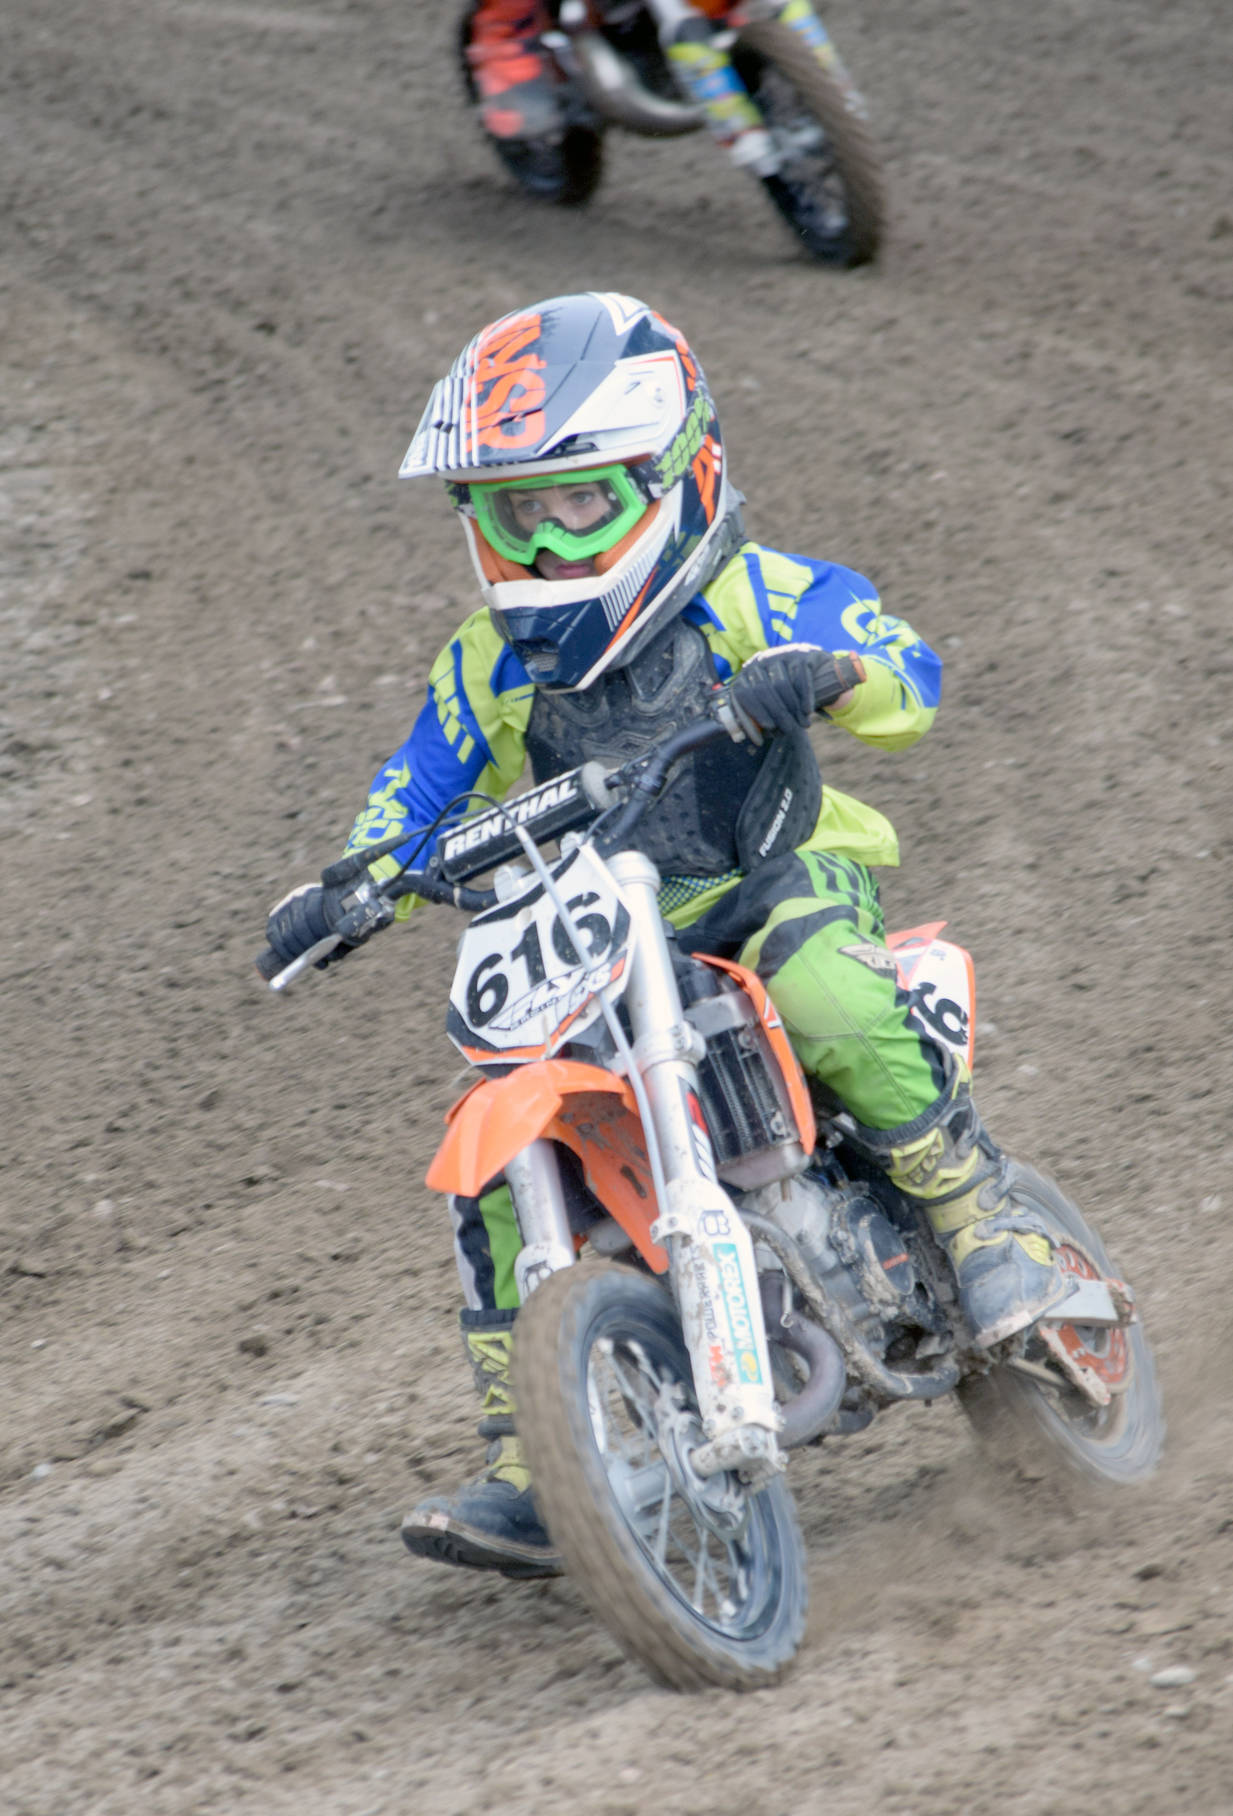 Kash Williams, of Soldotna, negotiates a turn in the 50cc race at the Alaska State Motocross Championships at Twin City Raceway on Sunday, June 17, 2018. (Photo by Jeff Helminiak/Peninsula Clarion)